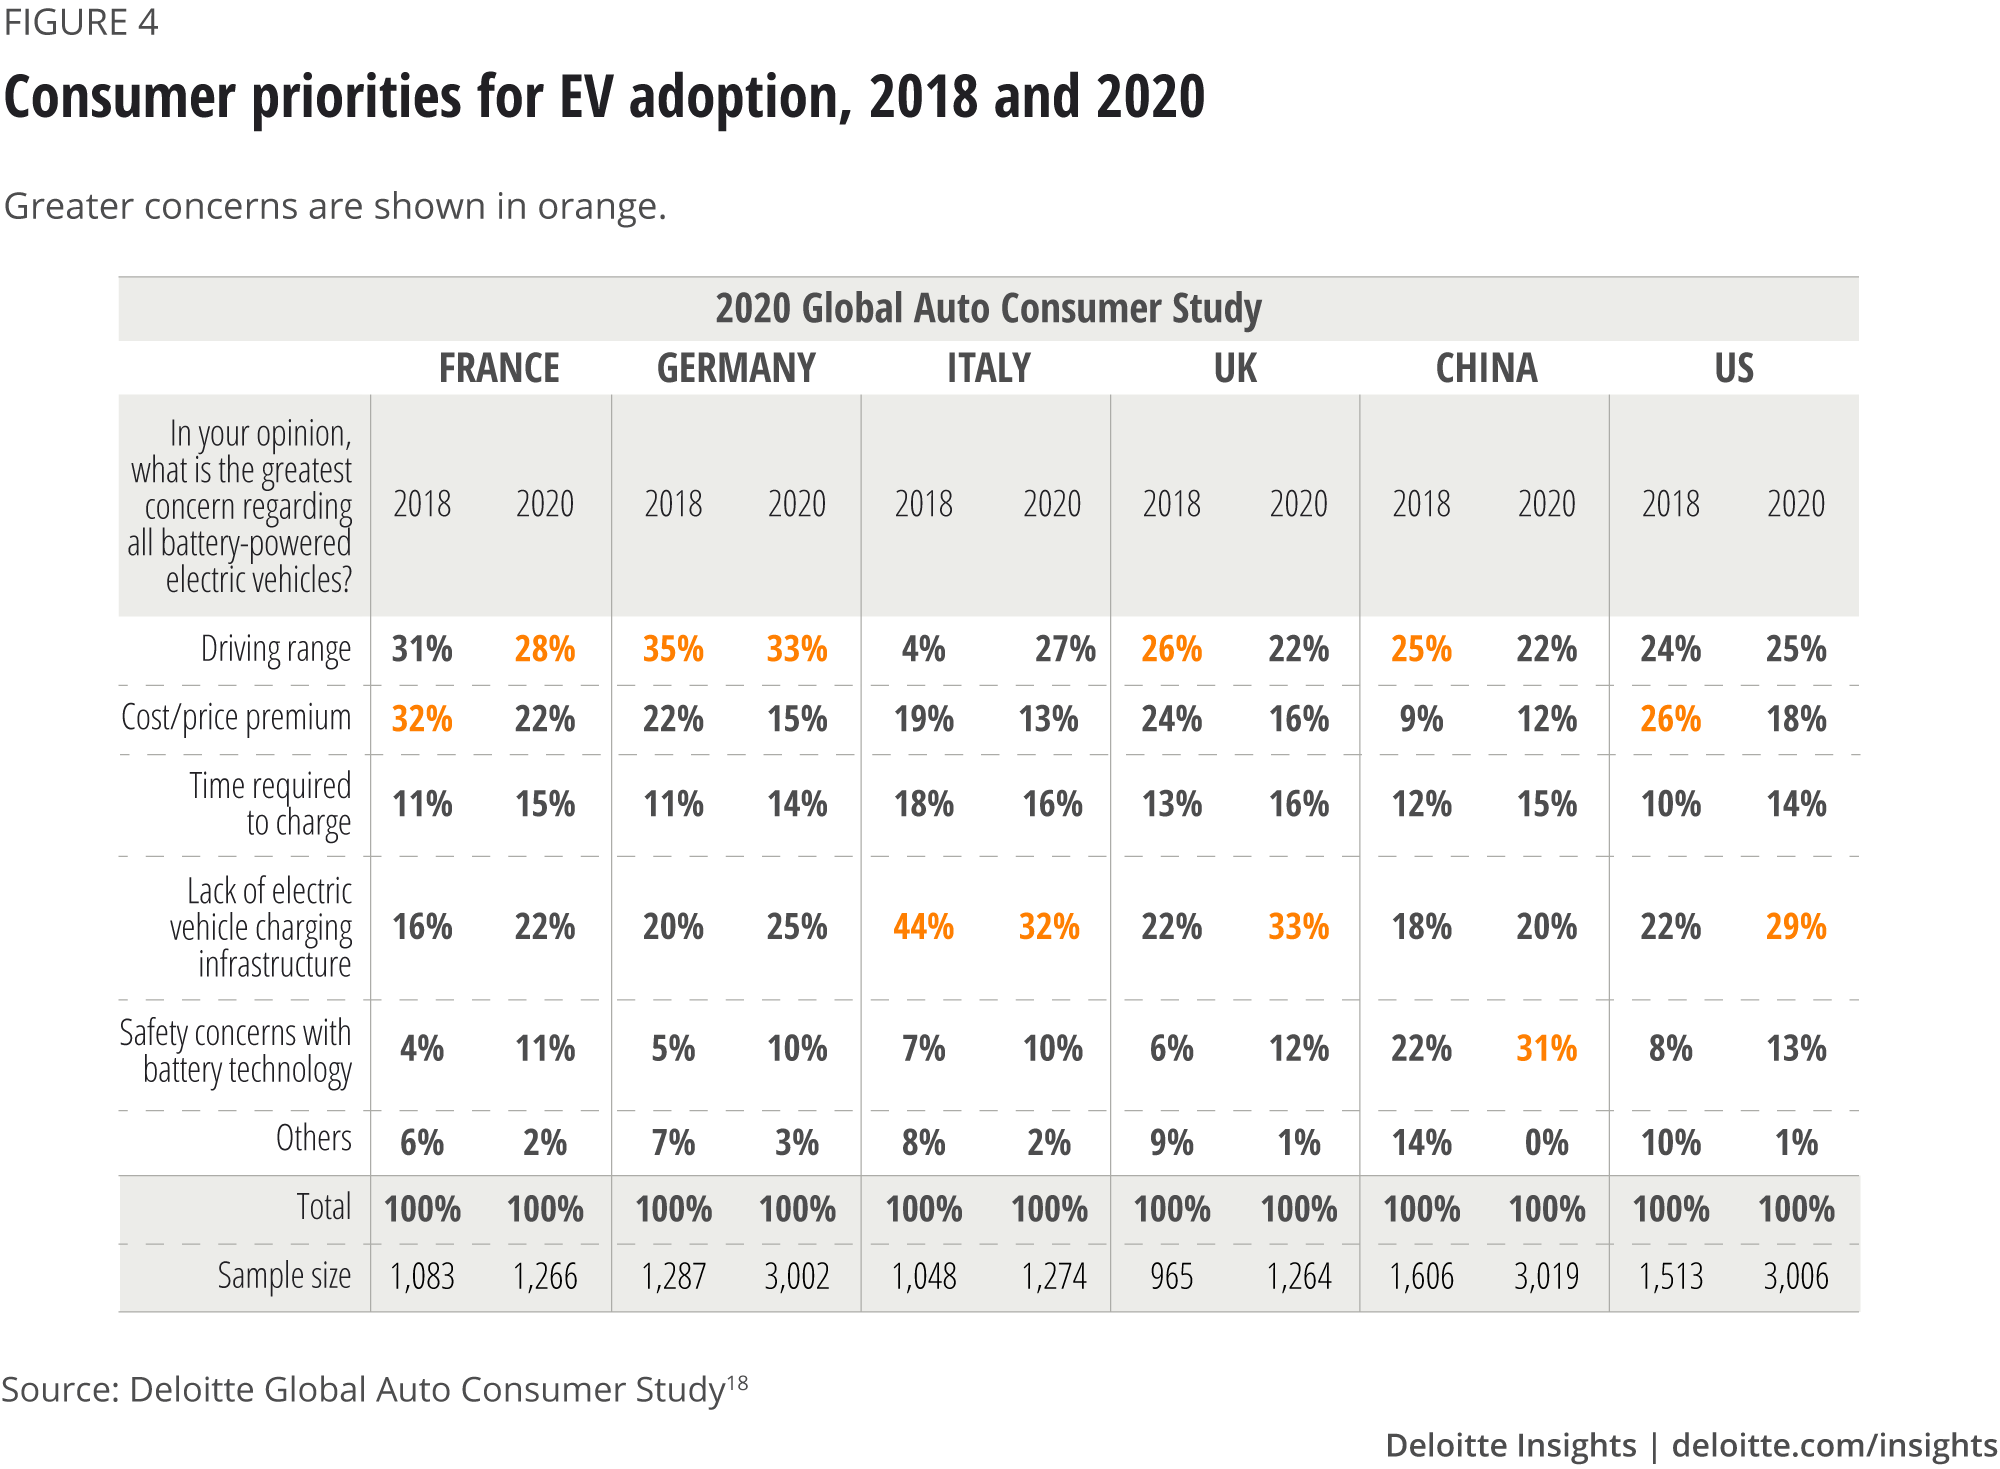 Compared consumer priorities with regard to aspects of EV adoption, 2018 and 2020